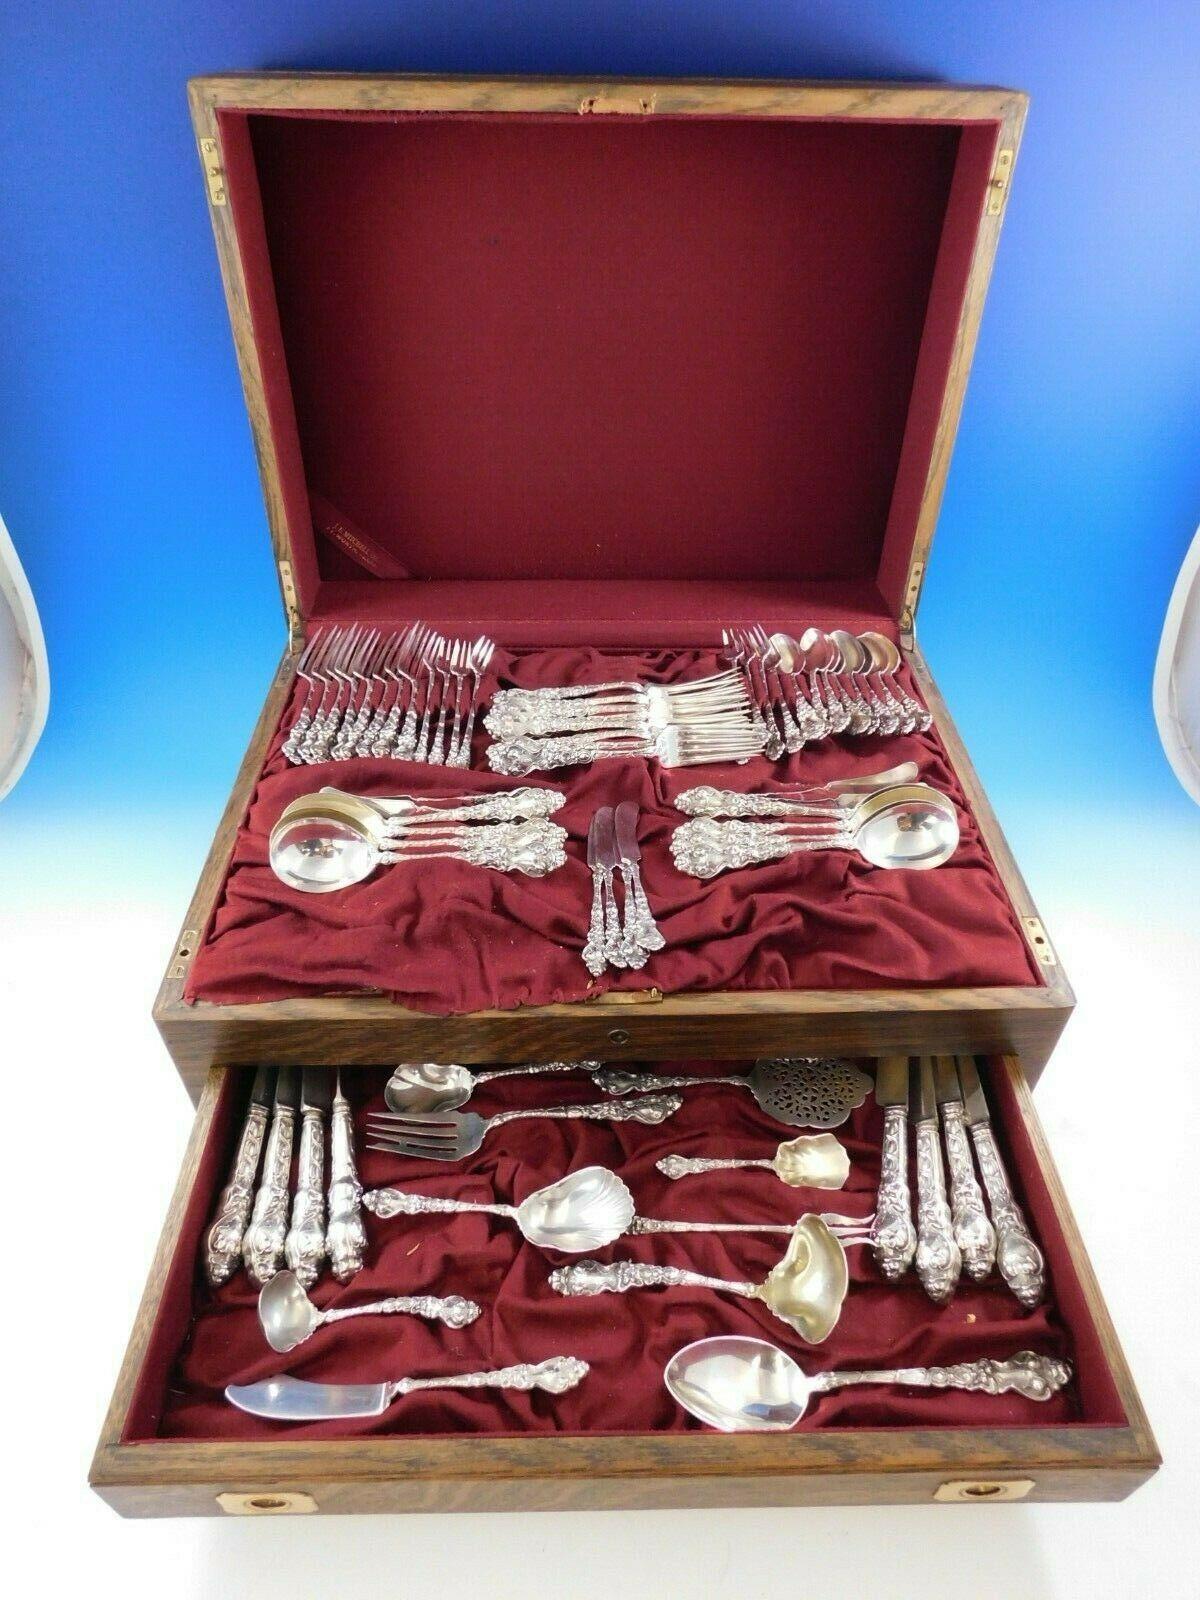 Exceptional Figural Art Nouveau Douvaine by Unger sterling silver flatware dinner size set - 68 pieces. This pattern features a stylized dolphin and the face of the north wind. This set includes:

8 dinner knives, 9 1/2